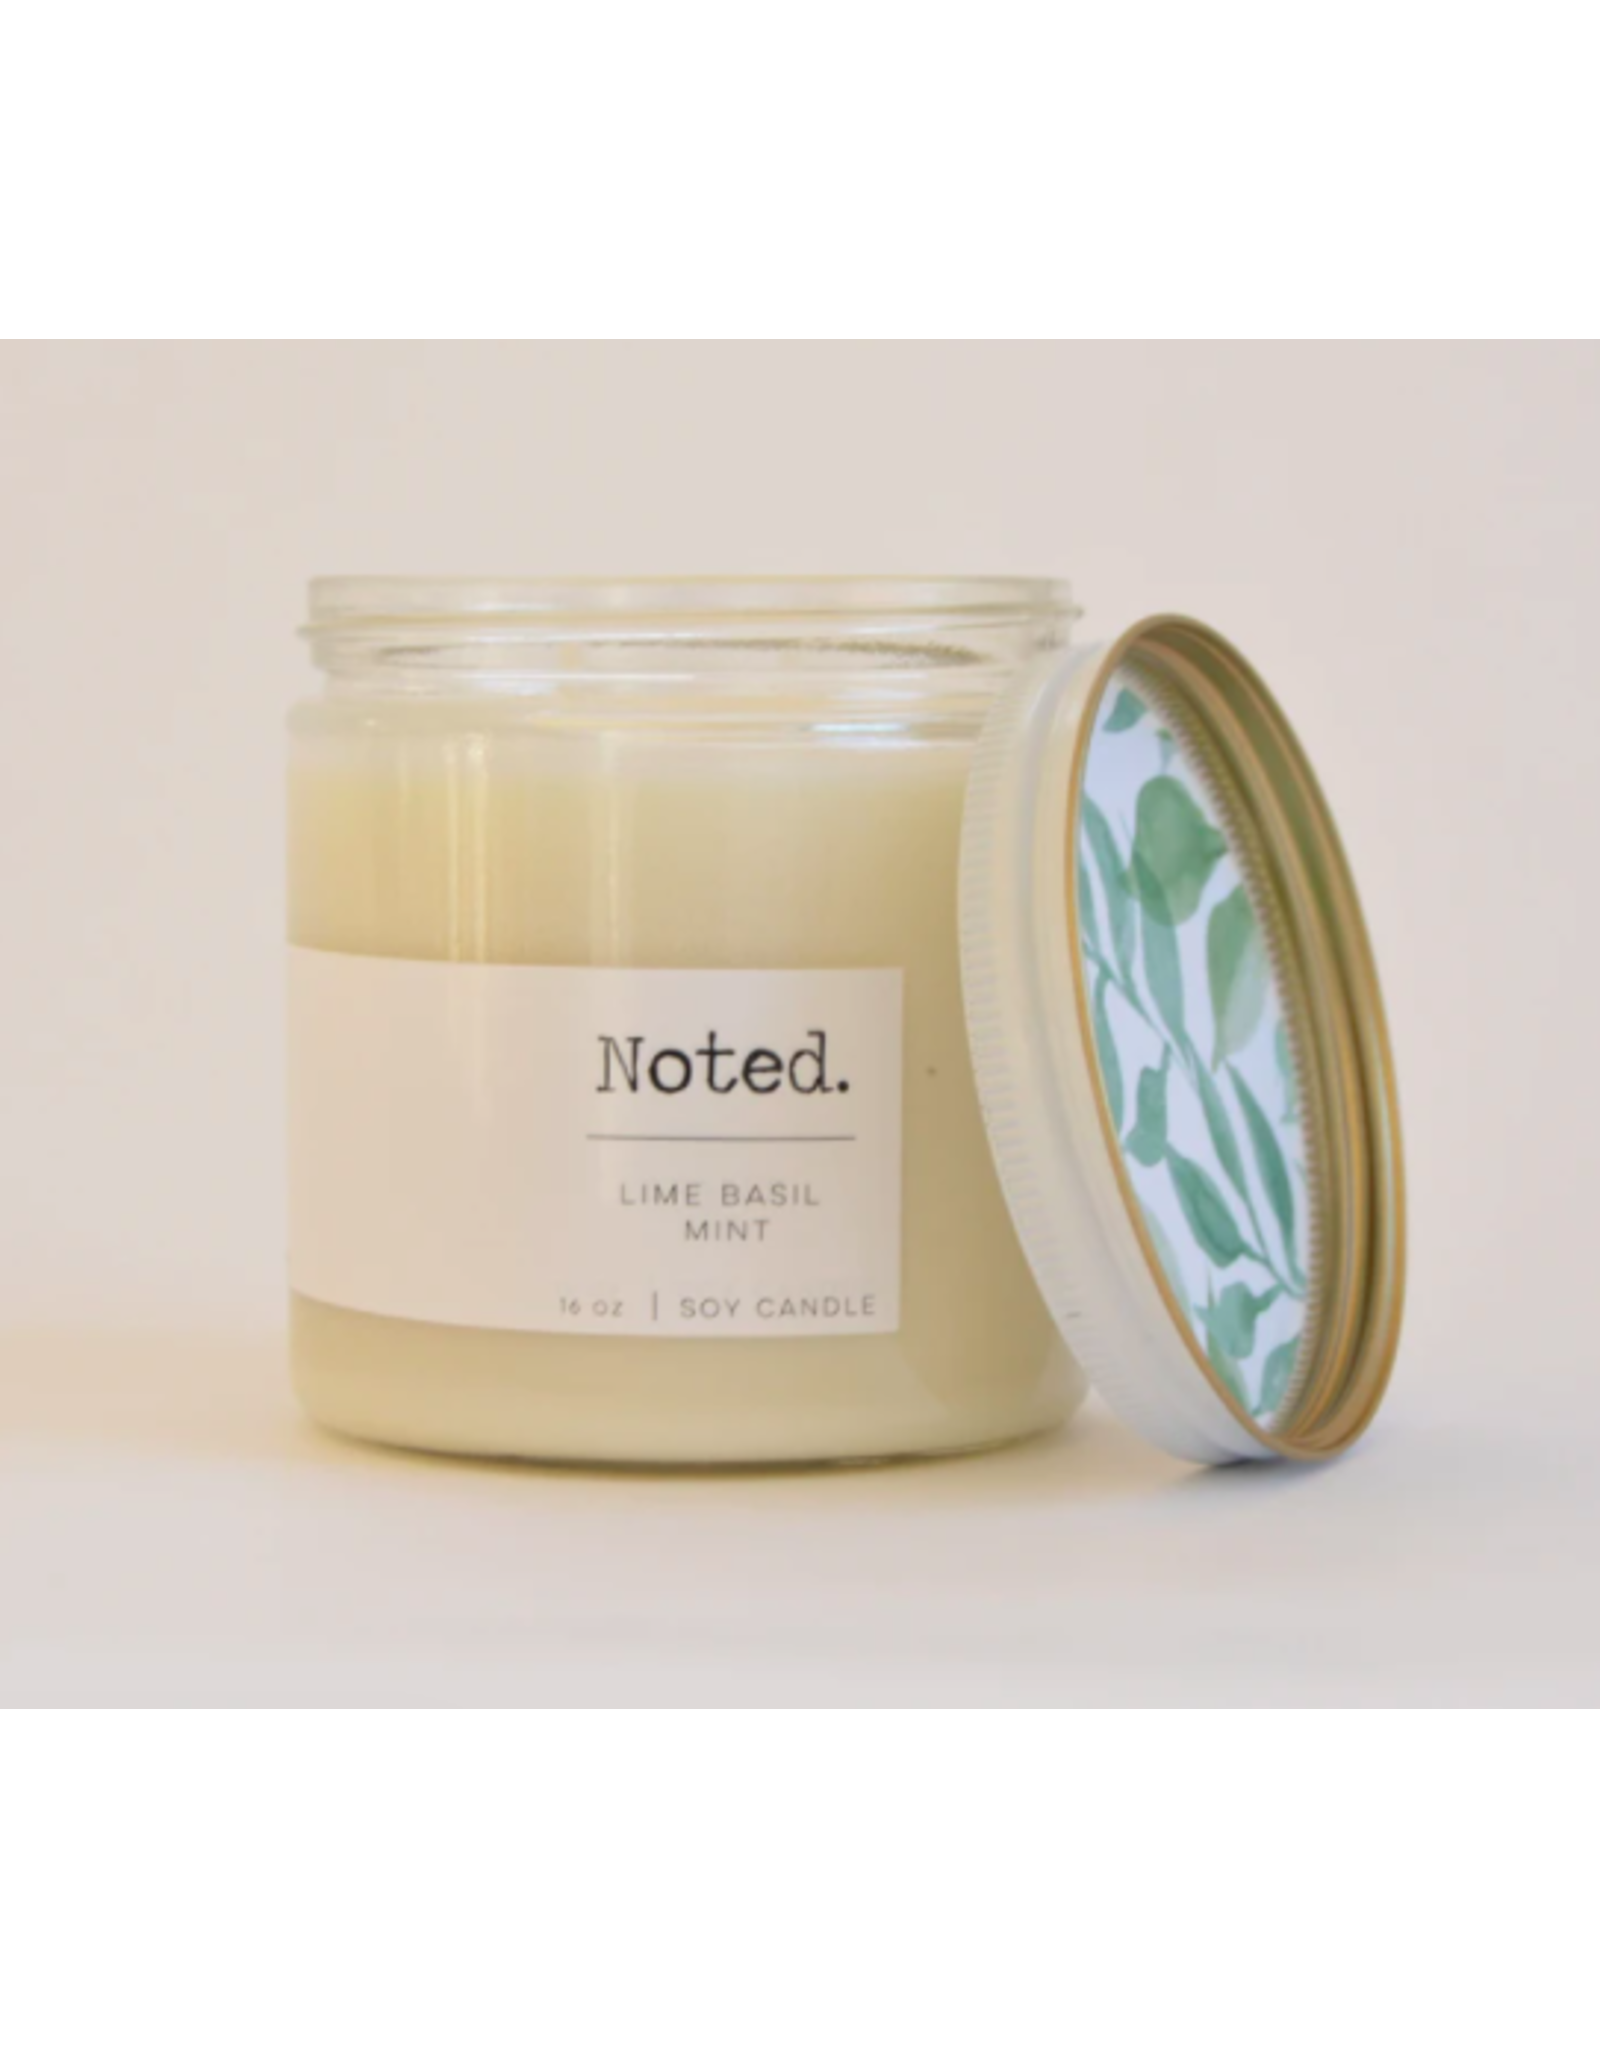 Noted Lime Basil Mint Candle